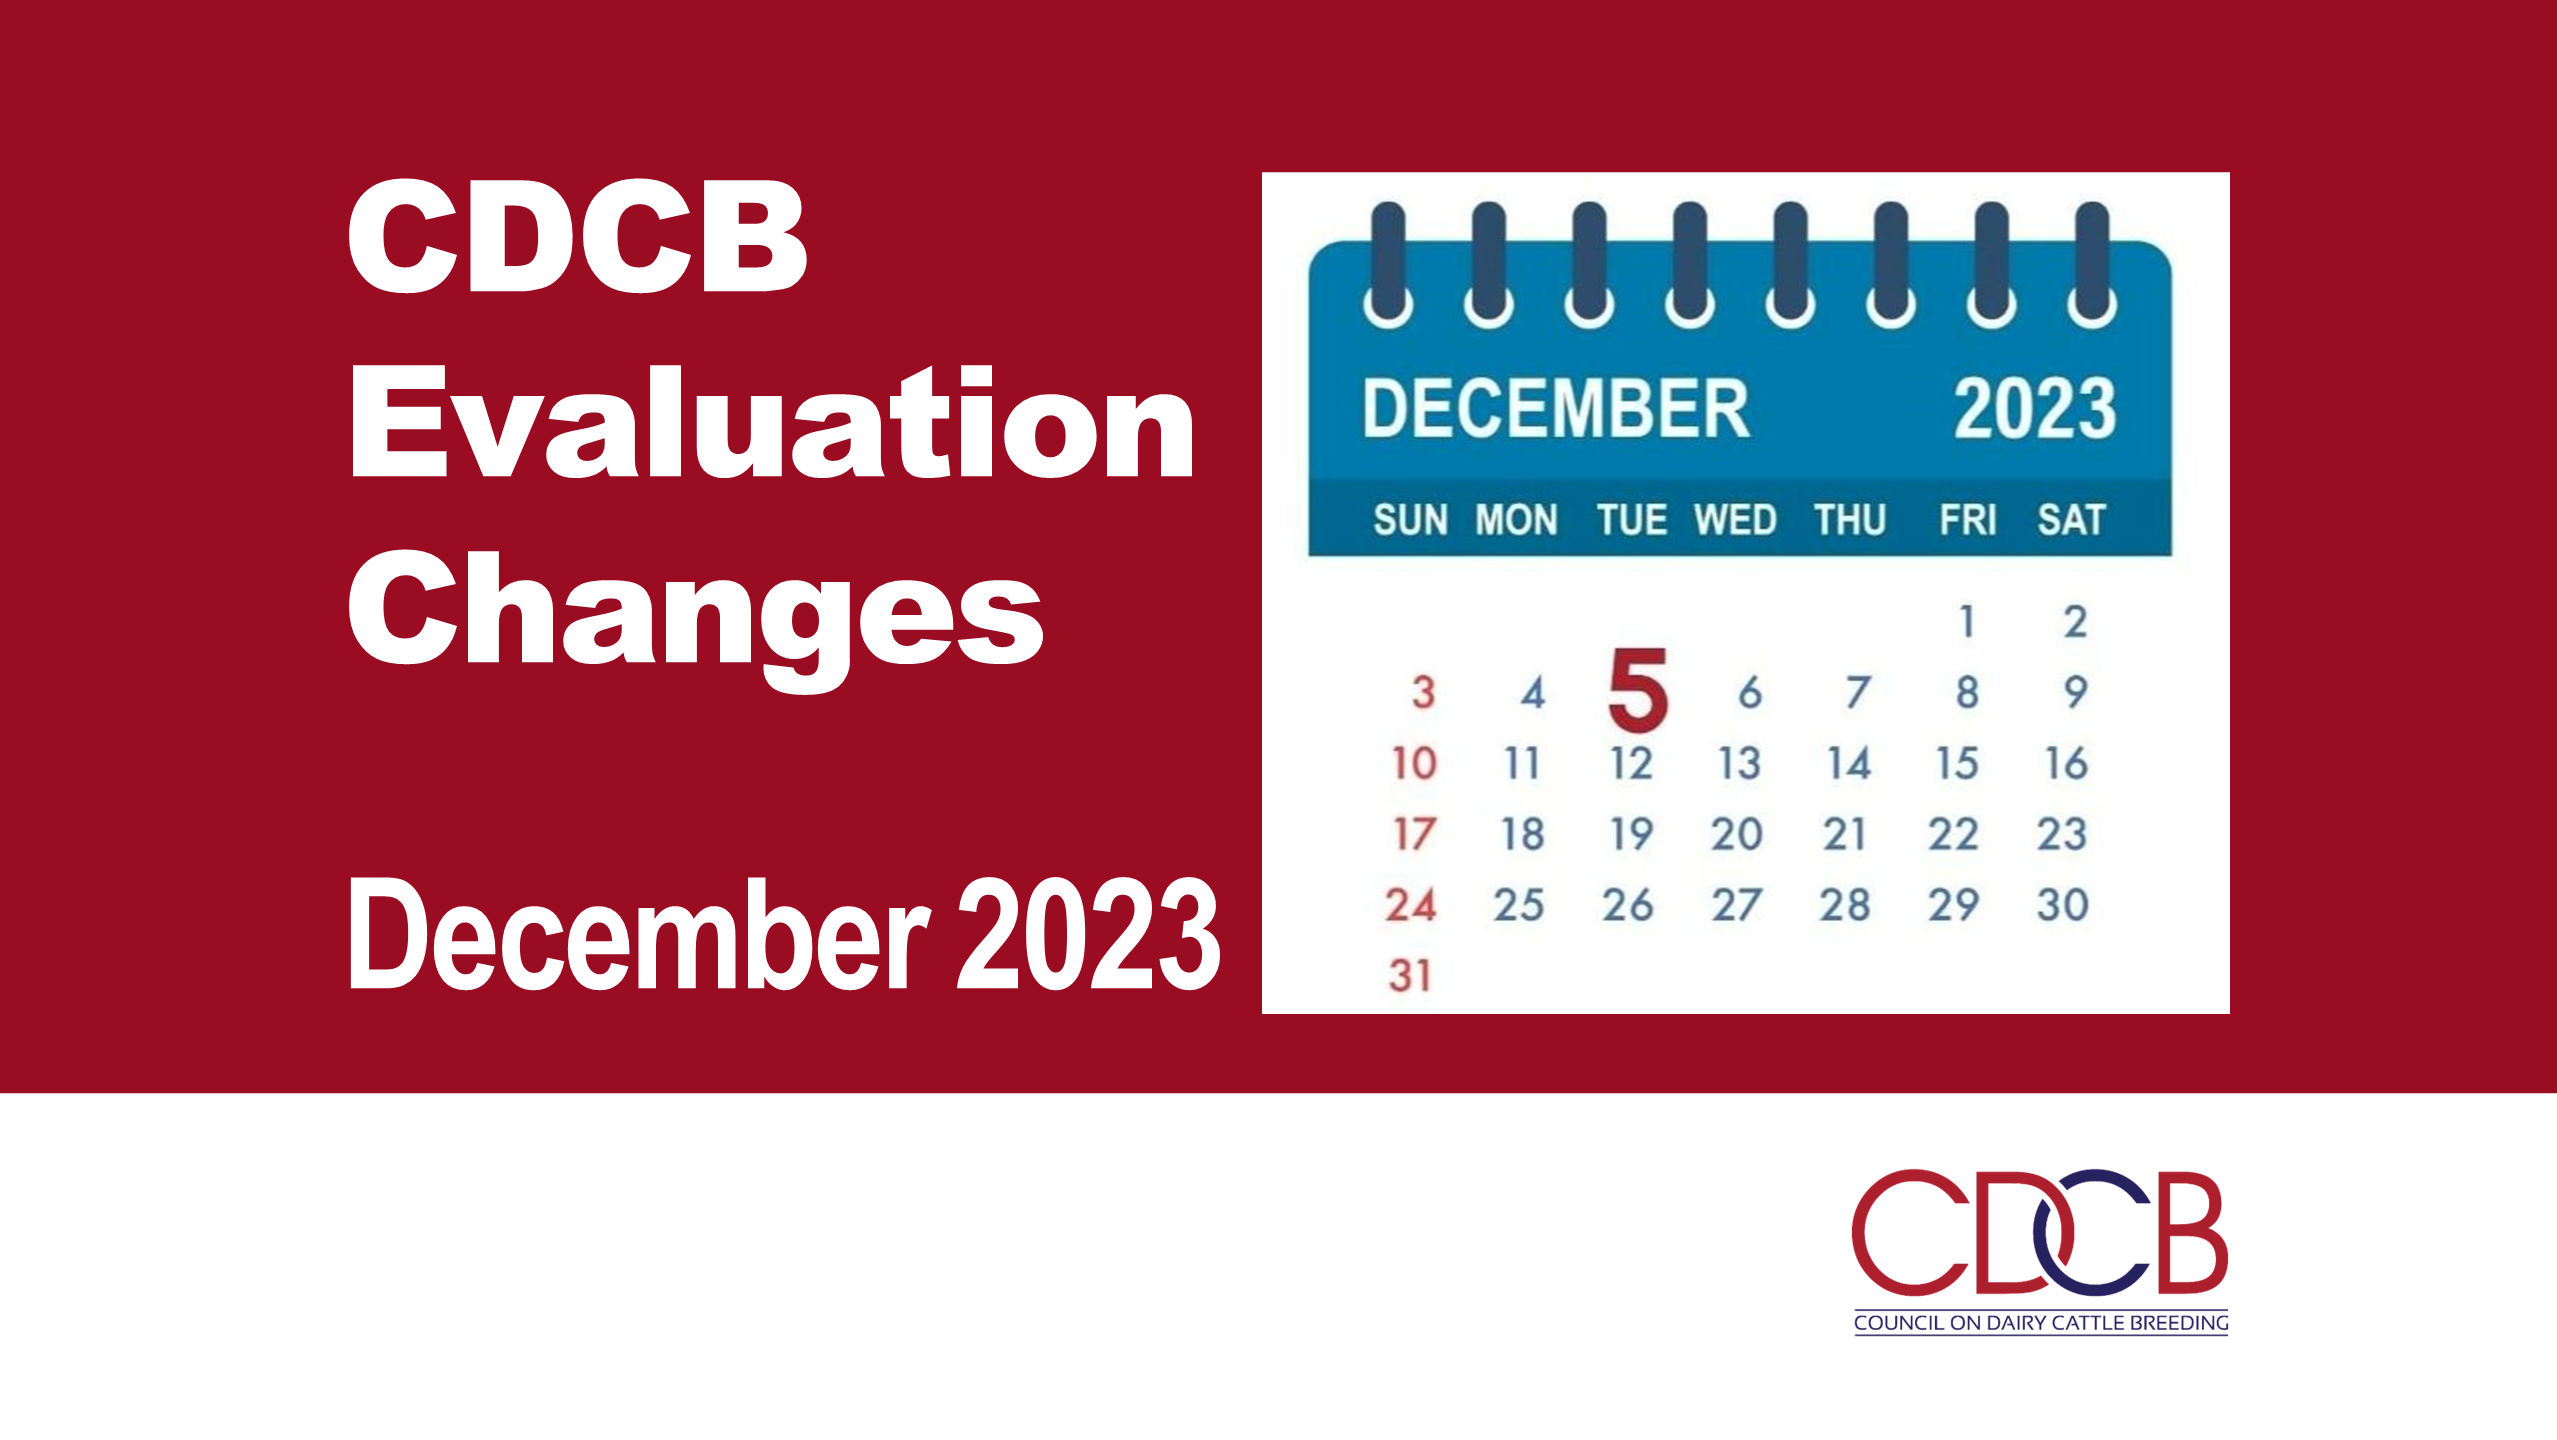 December 2023 Evaluation Changes: What’s New?